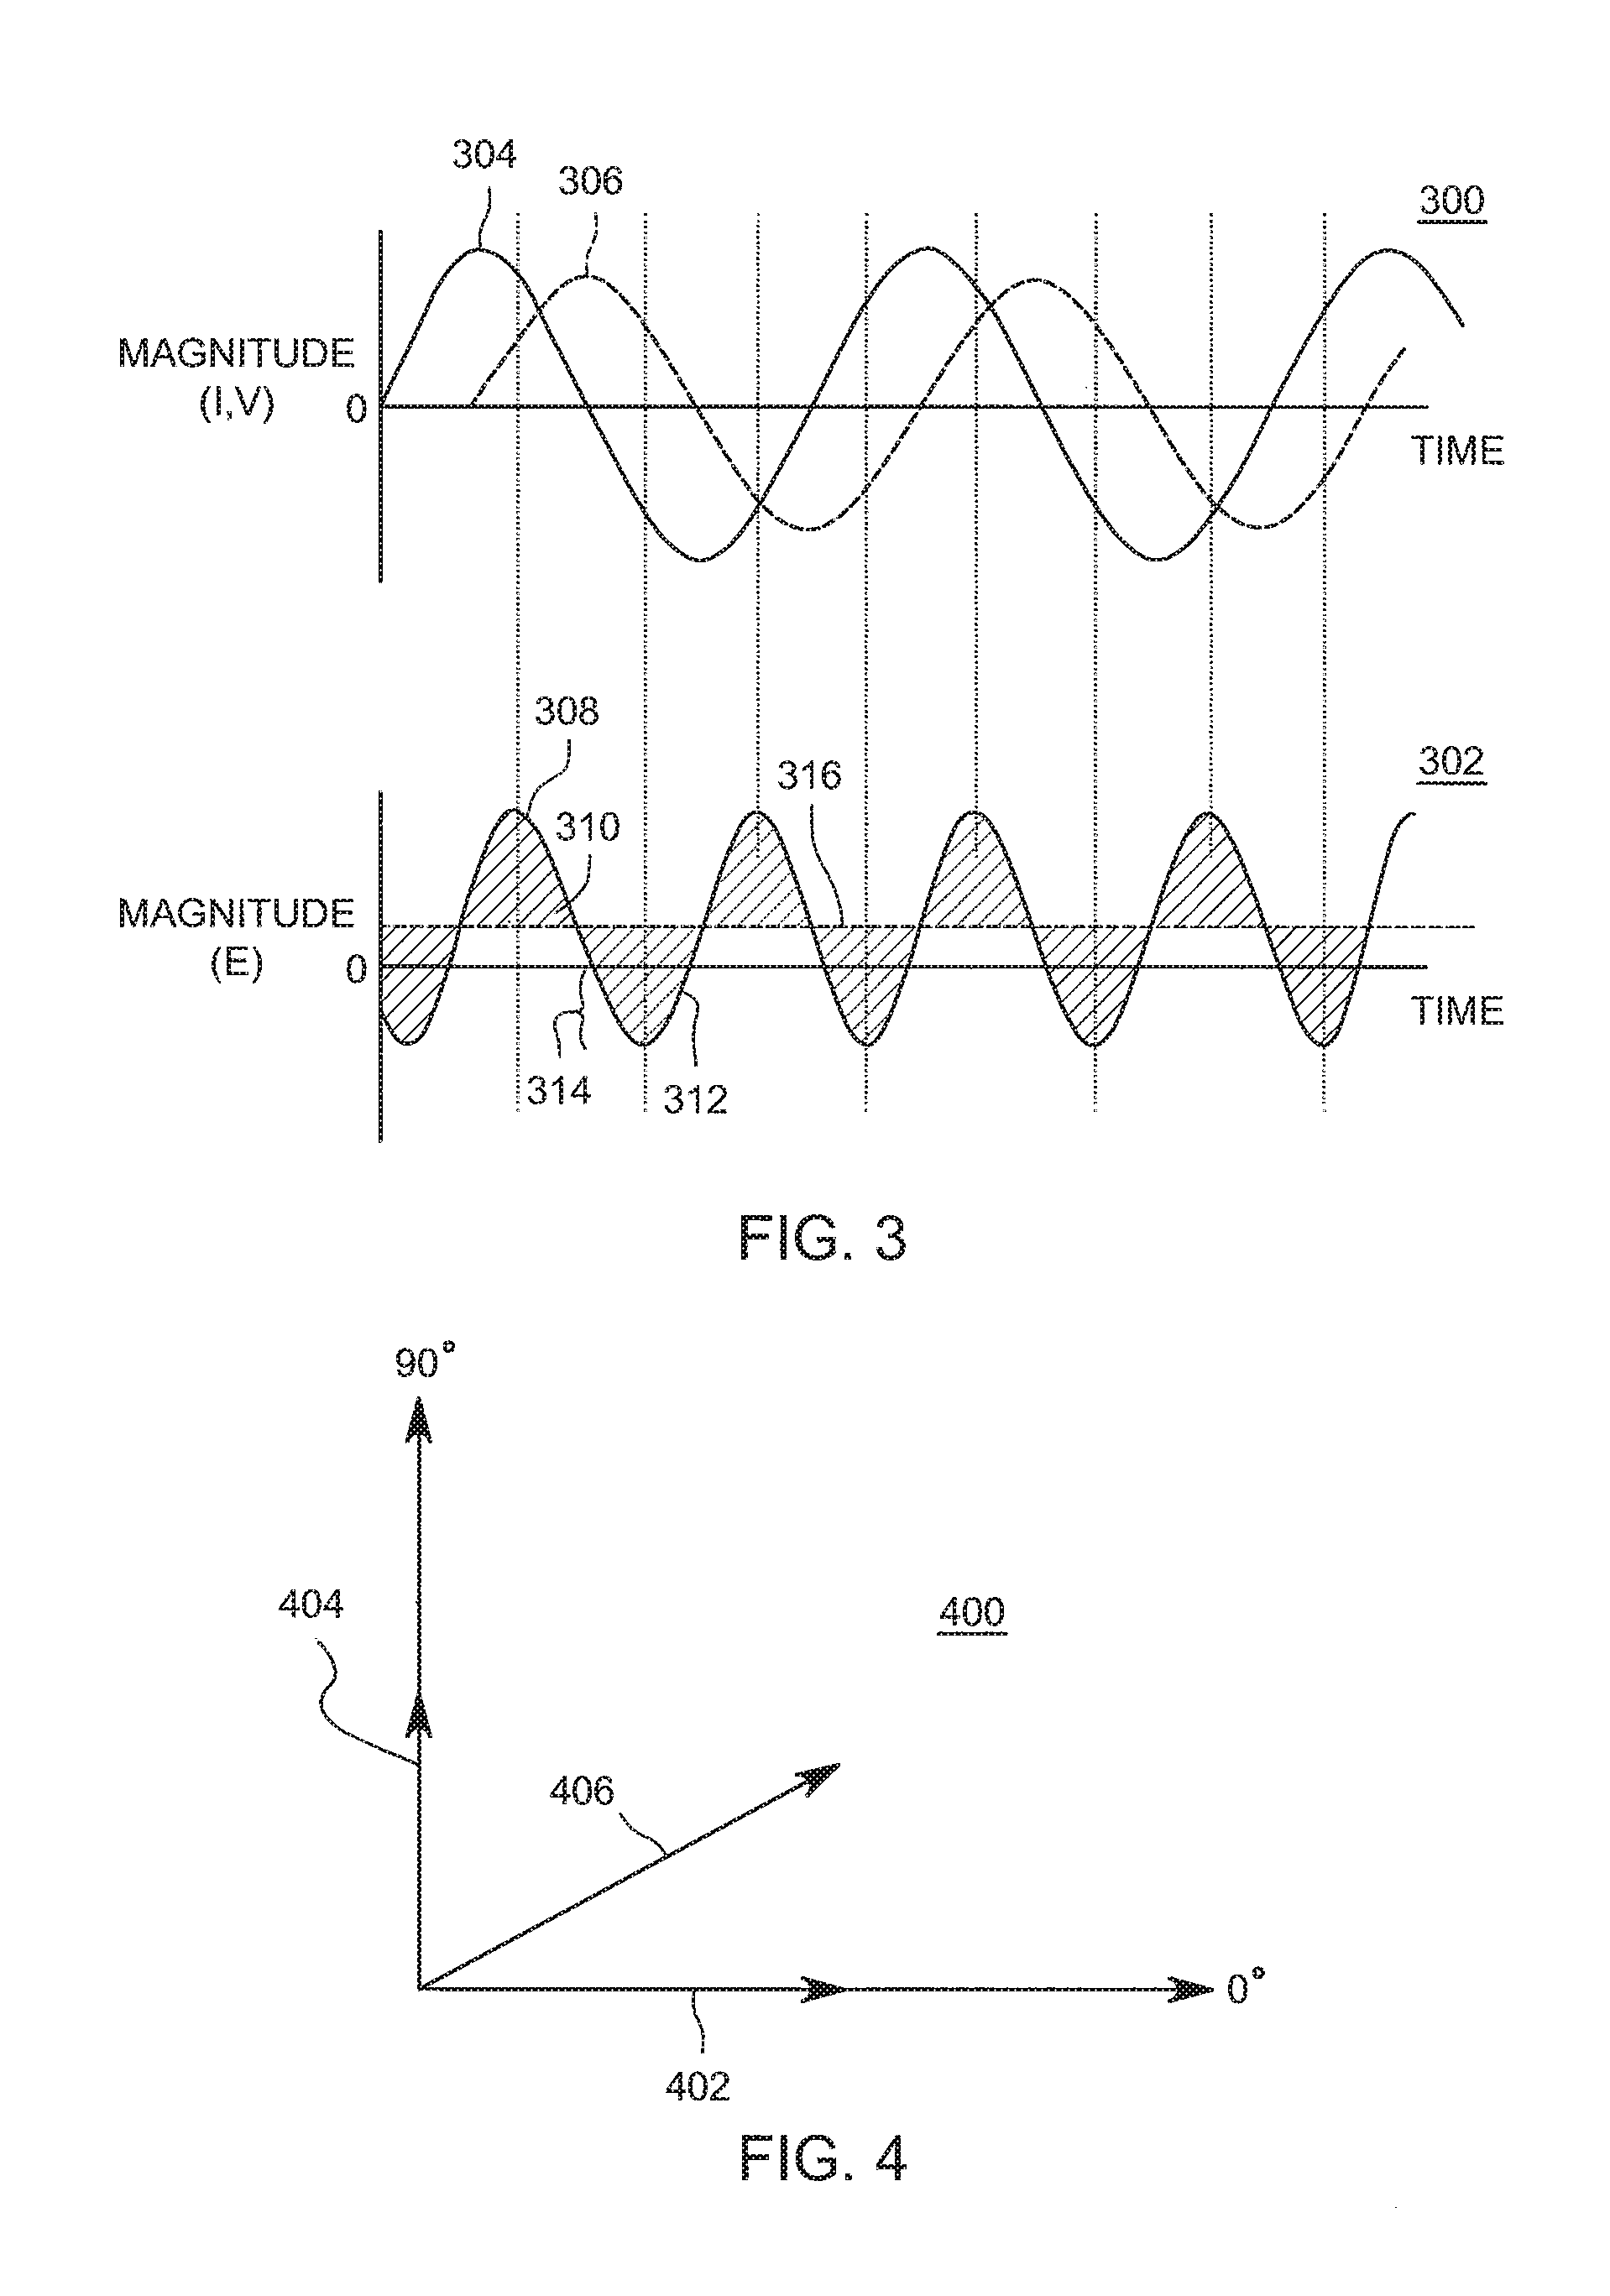 Apparatus and method for reactive power control